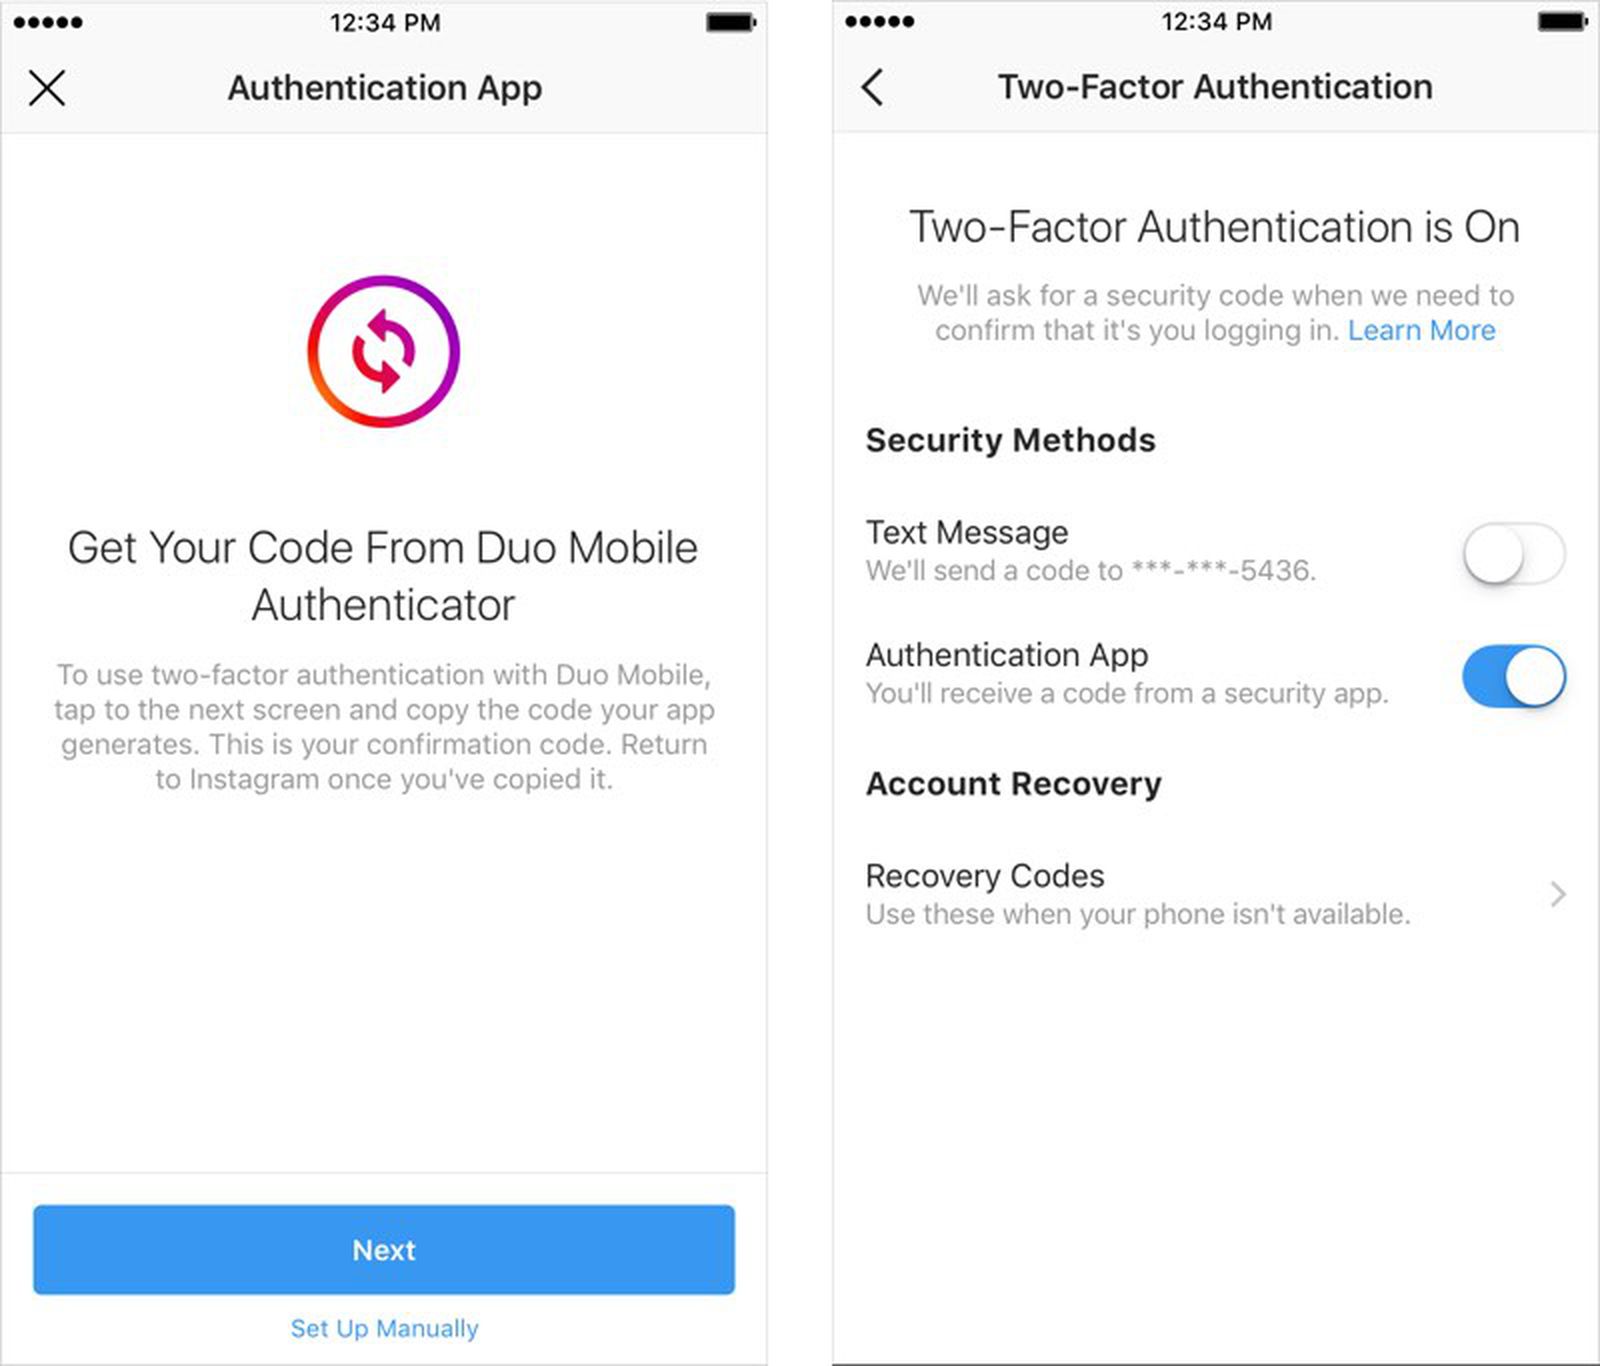 How to Get New Two-Factor Authentication Codes in Instagram